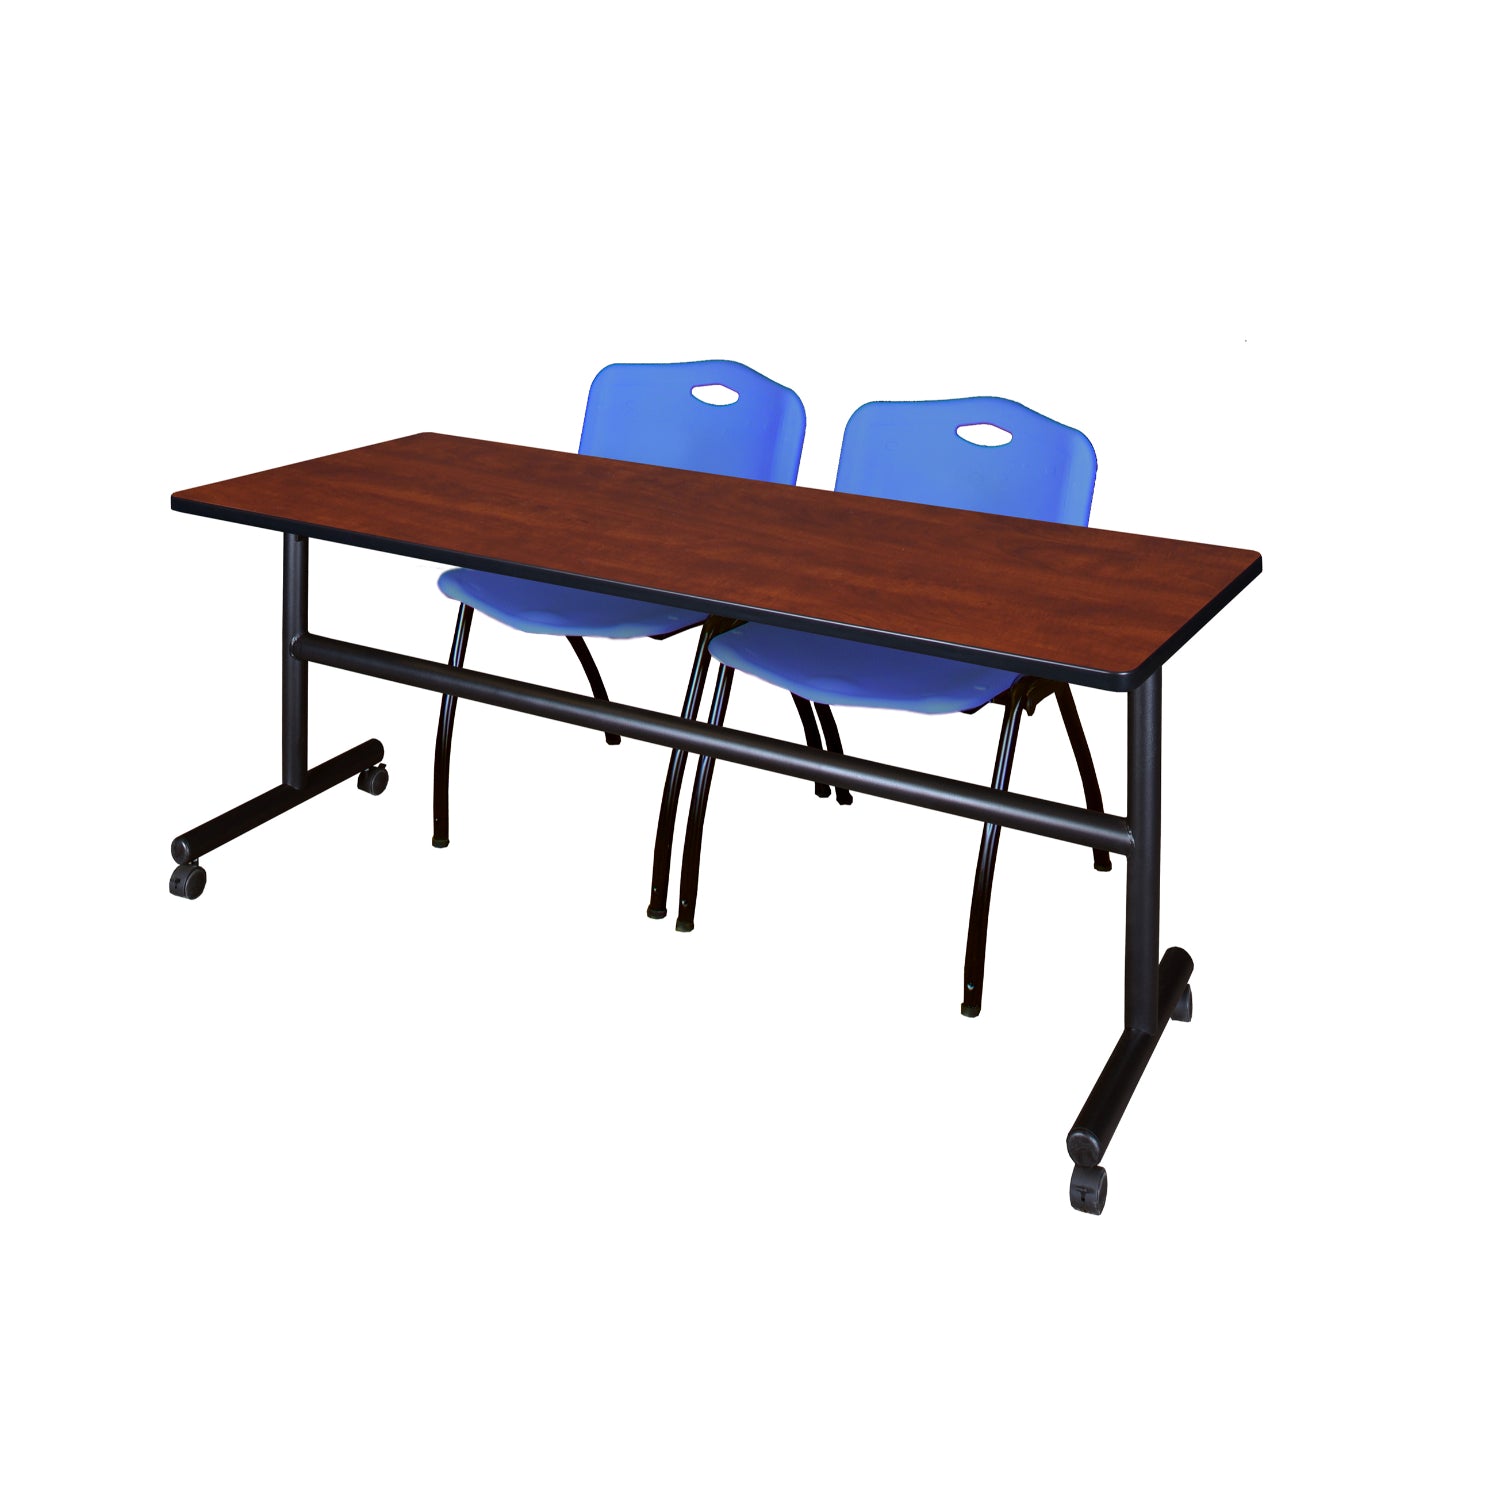 Kobe Flip Top Training Table and Chair Package, Kobe 72" x 24" Flip Top Mobile Nesting Table with 2 "M" Stack Chairs